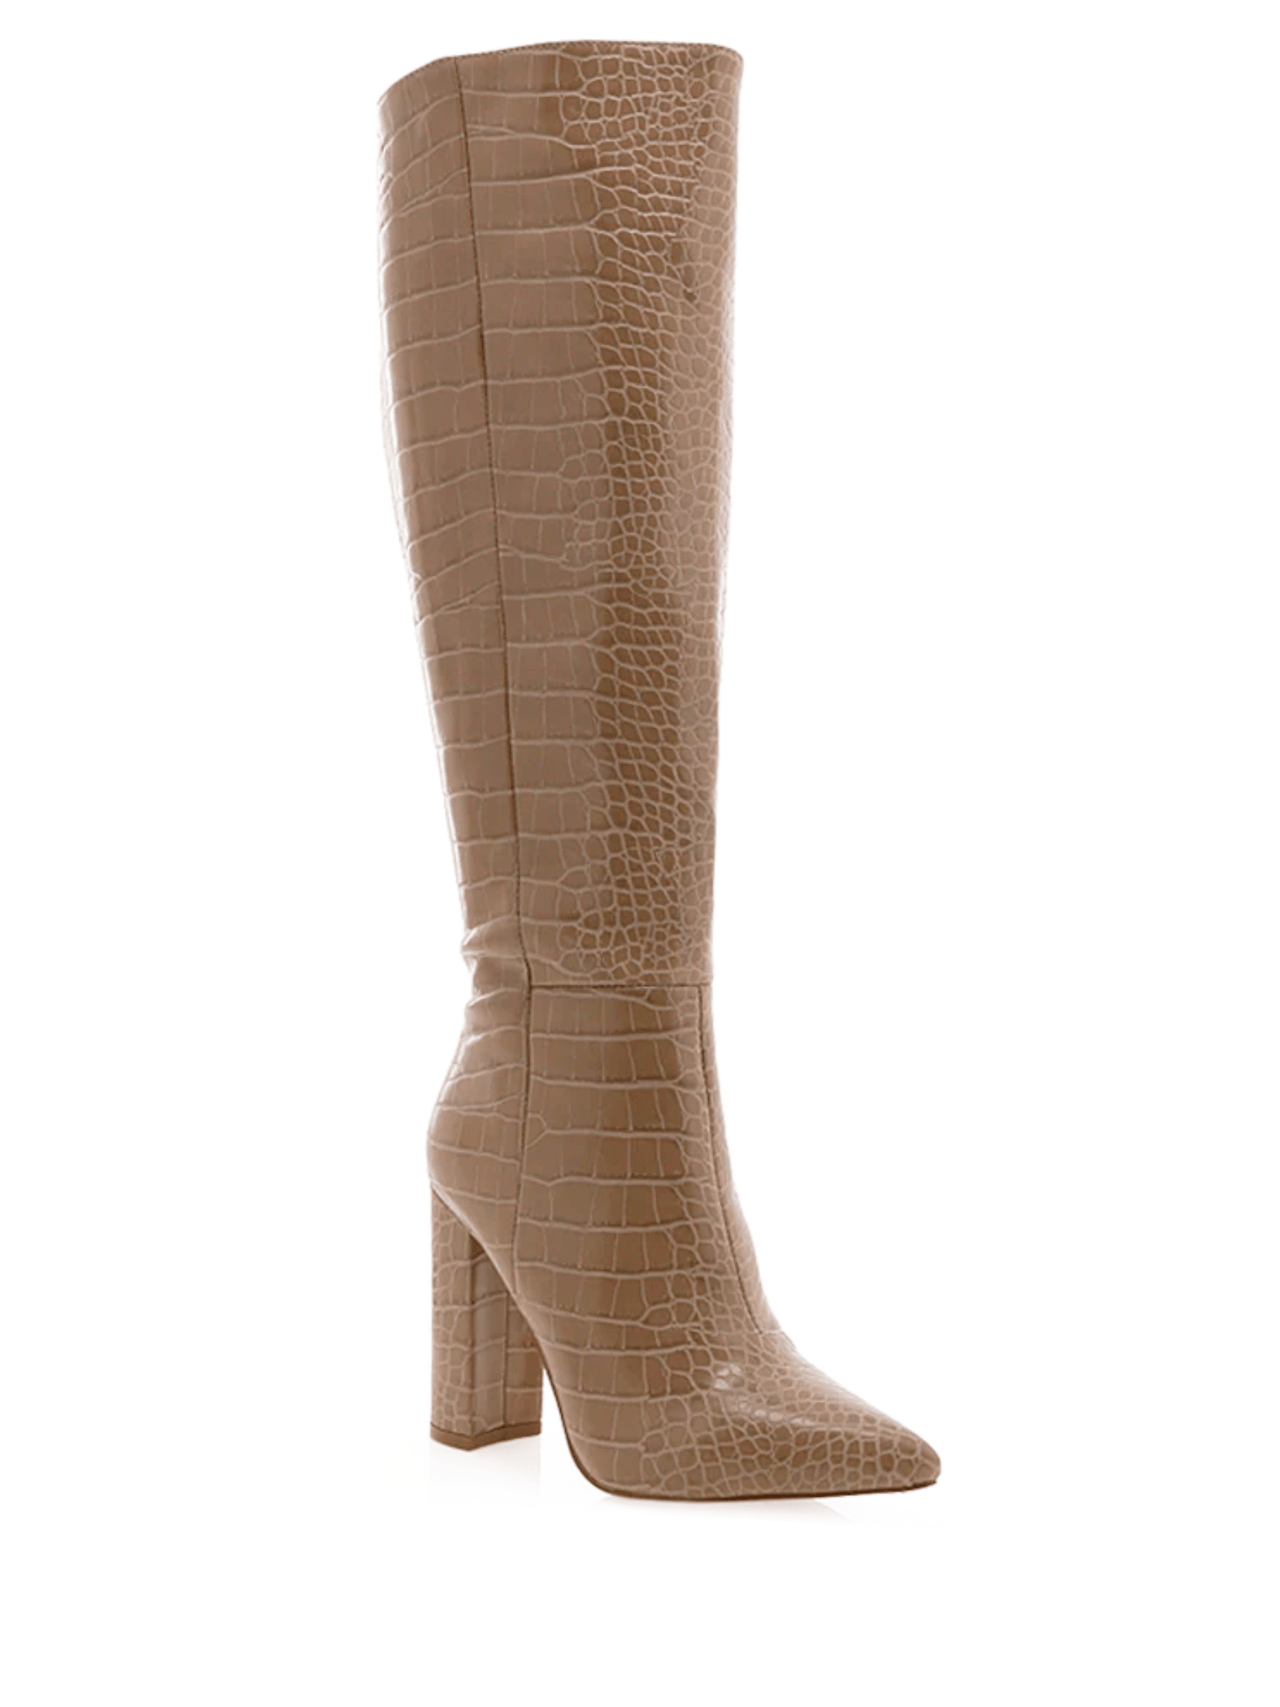 Milla Snake Knee High Boot Light Taupe, Shoes by Billini Shoes | LIT Boutique